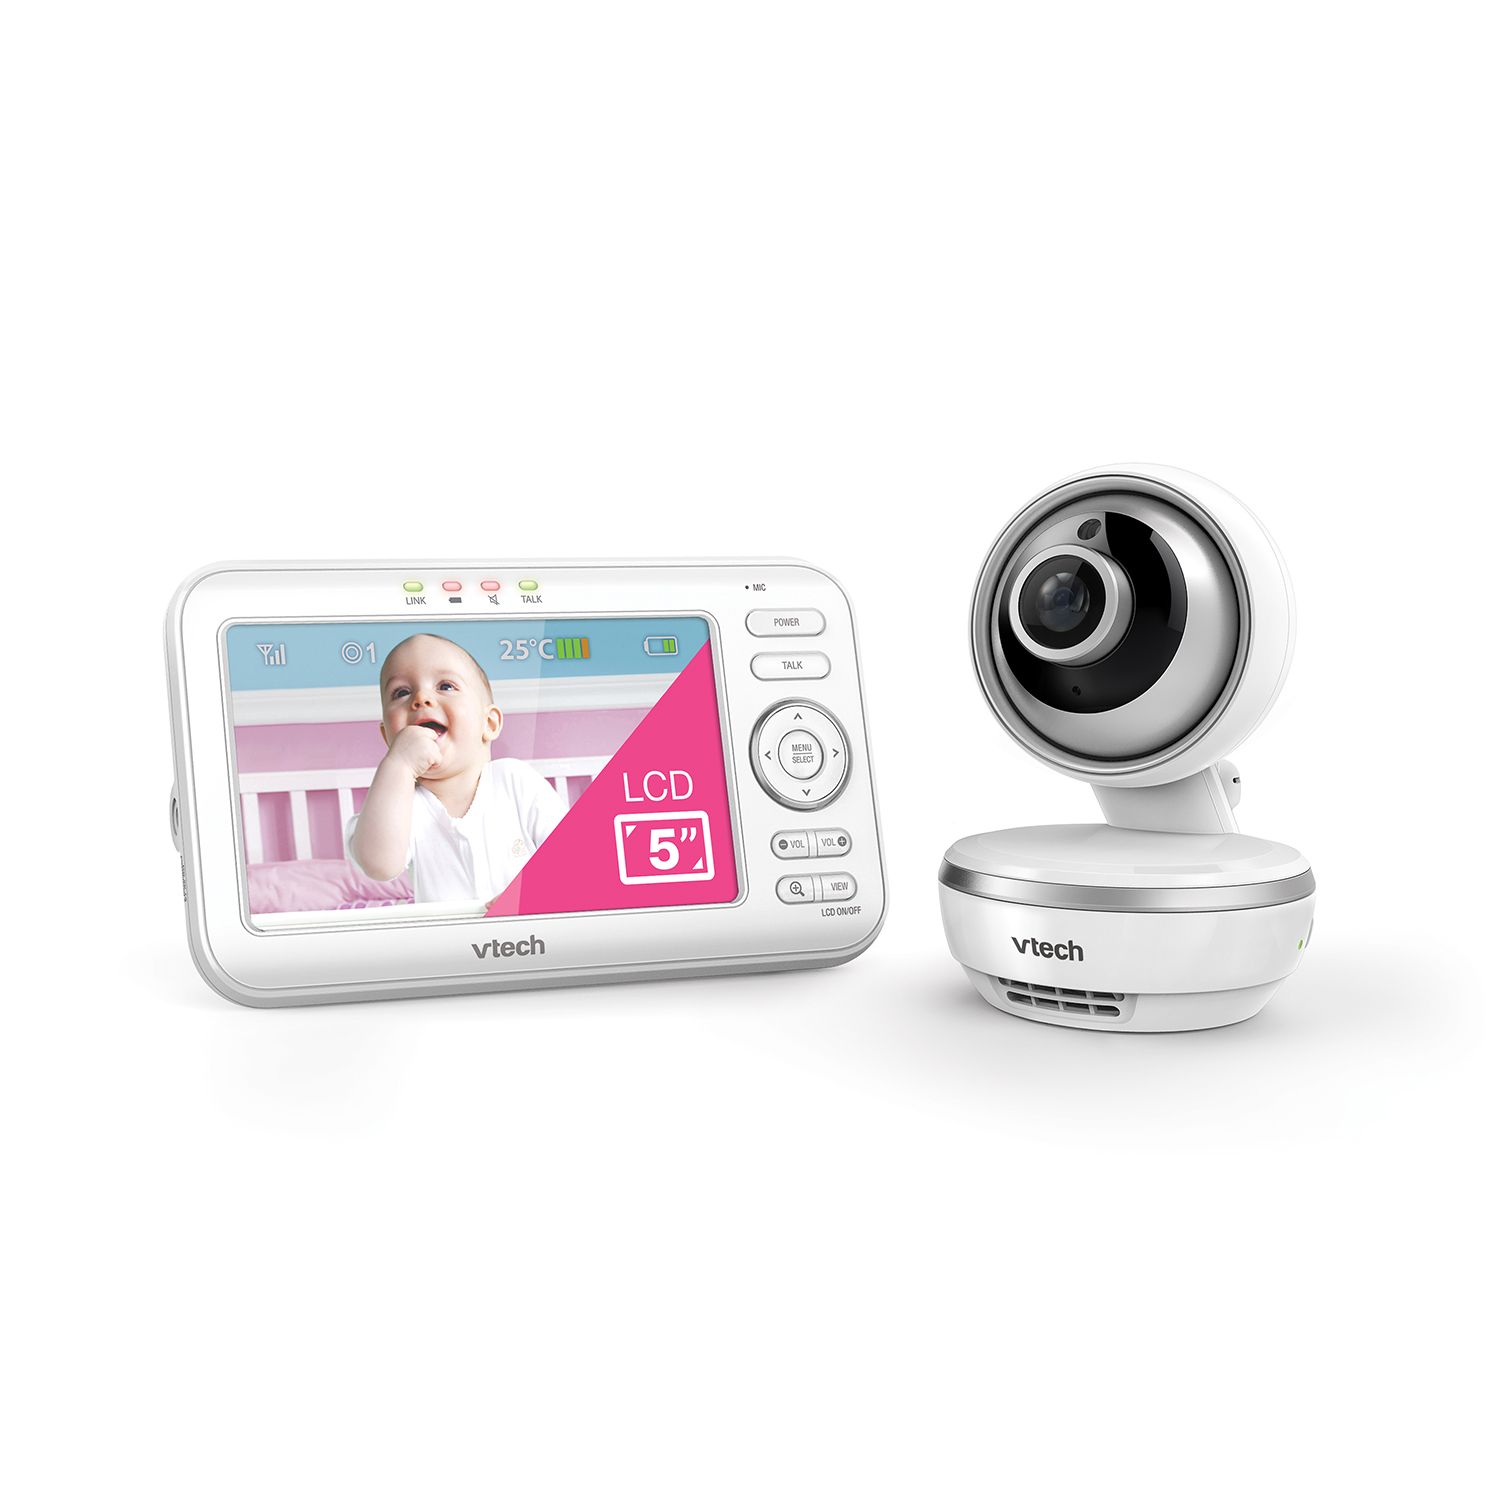 5" Pan & Tilt Colour Video Baby Monitor with Wide-Angle Lens 